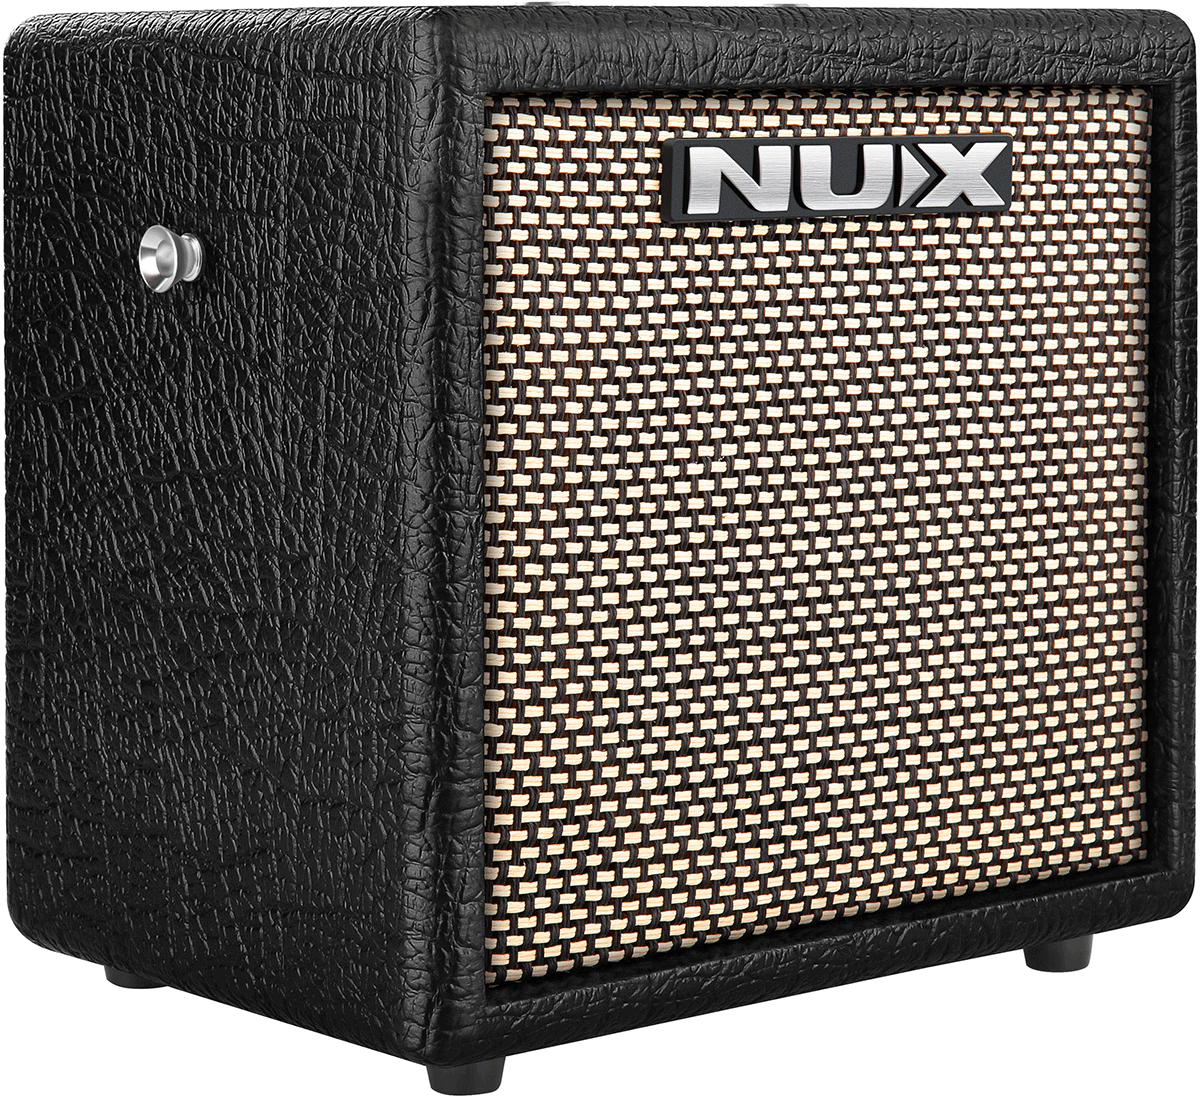 Nux Mighty 8 Bt 8w 1x6.5 - Electric guitar combo amp - Variation 5